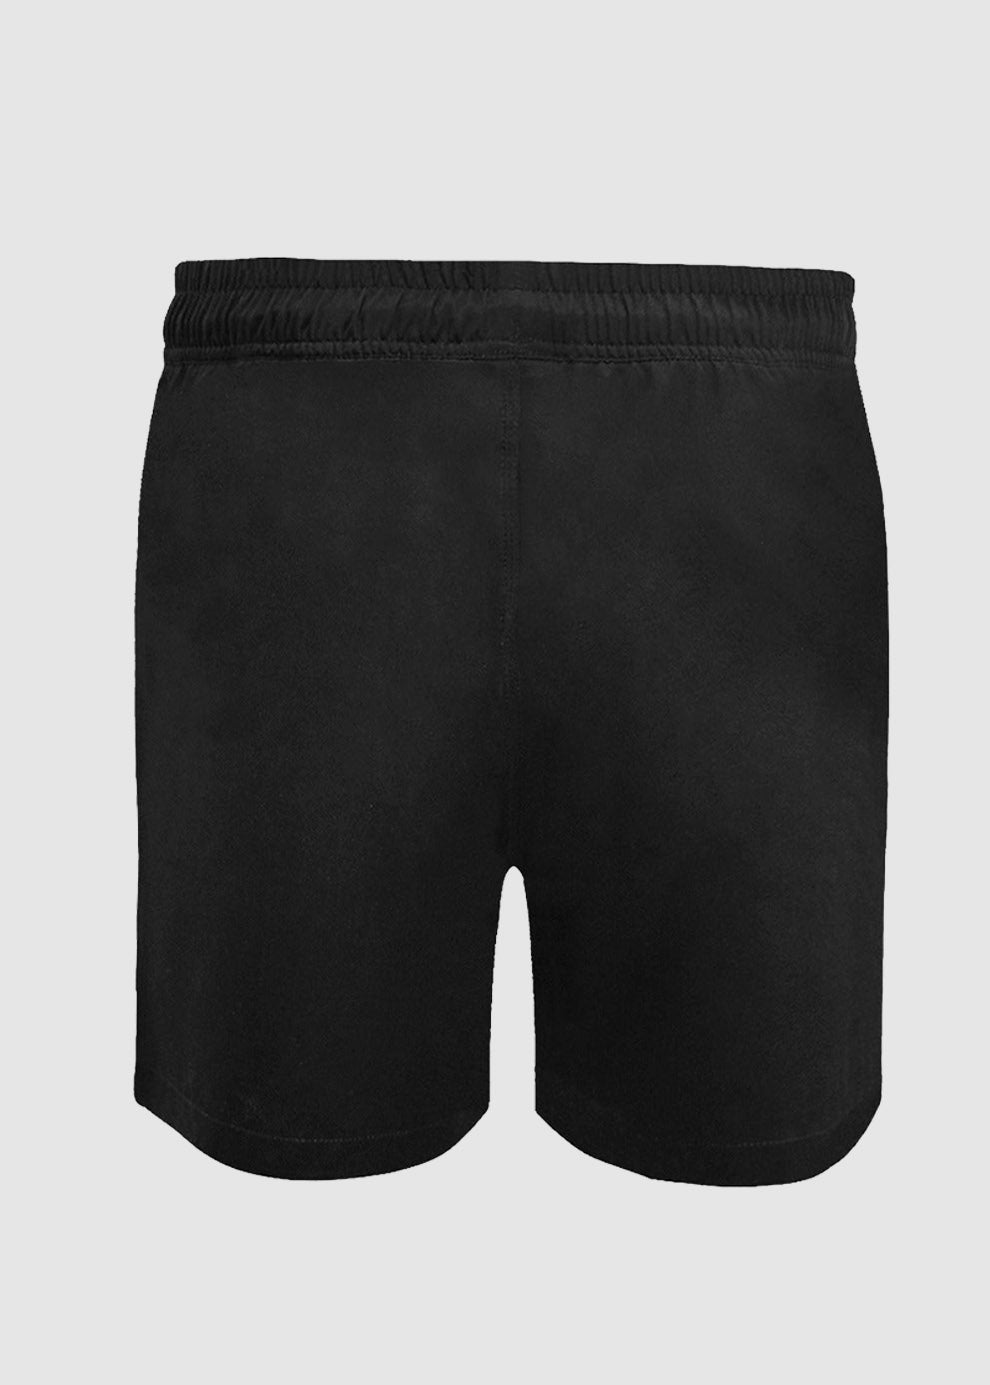 In Control Japanese Mens Mid Length Swim Trunks - In Control Clothing